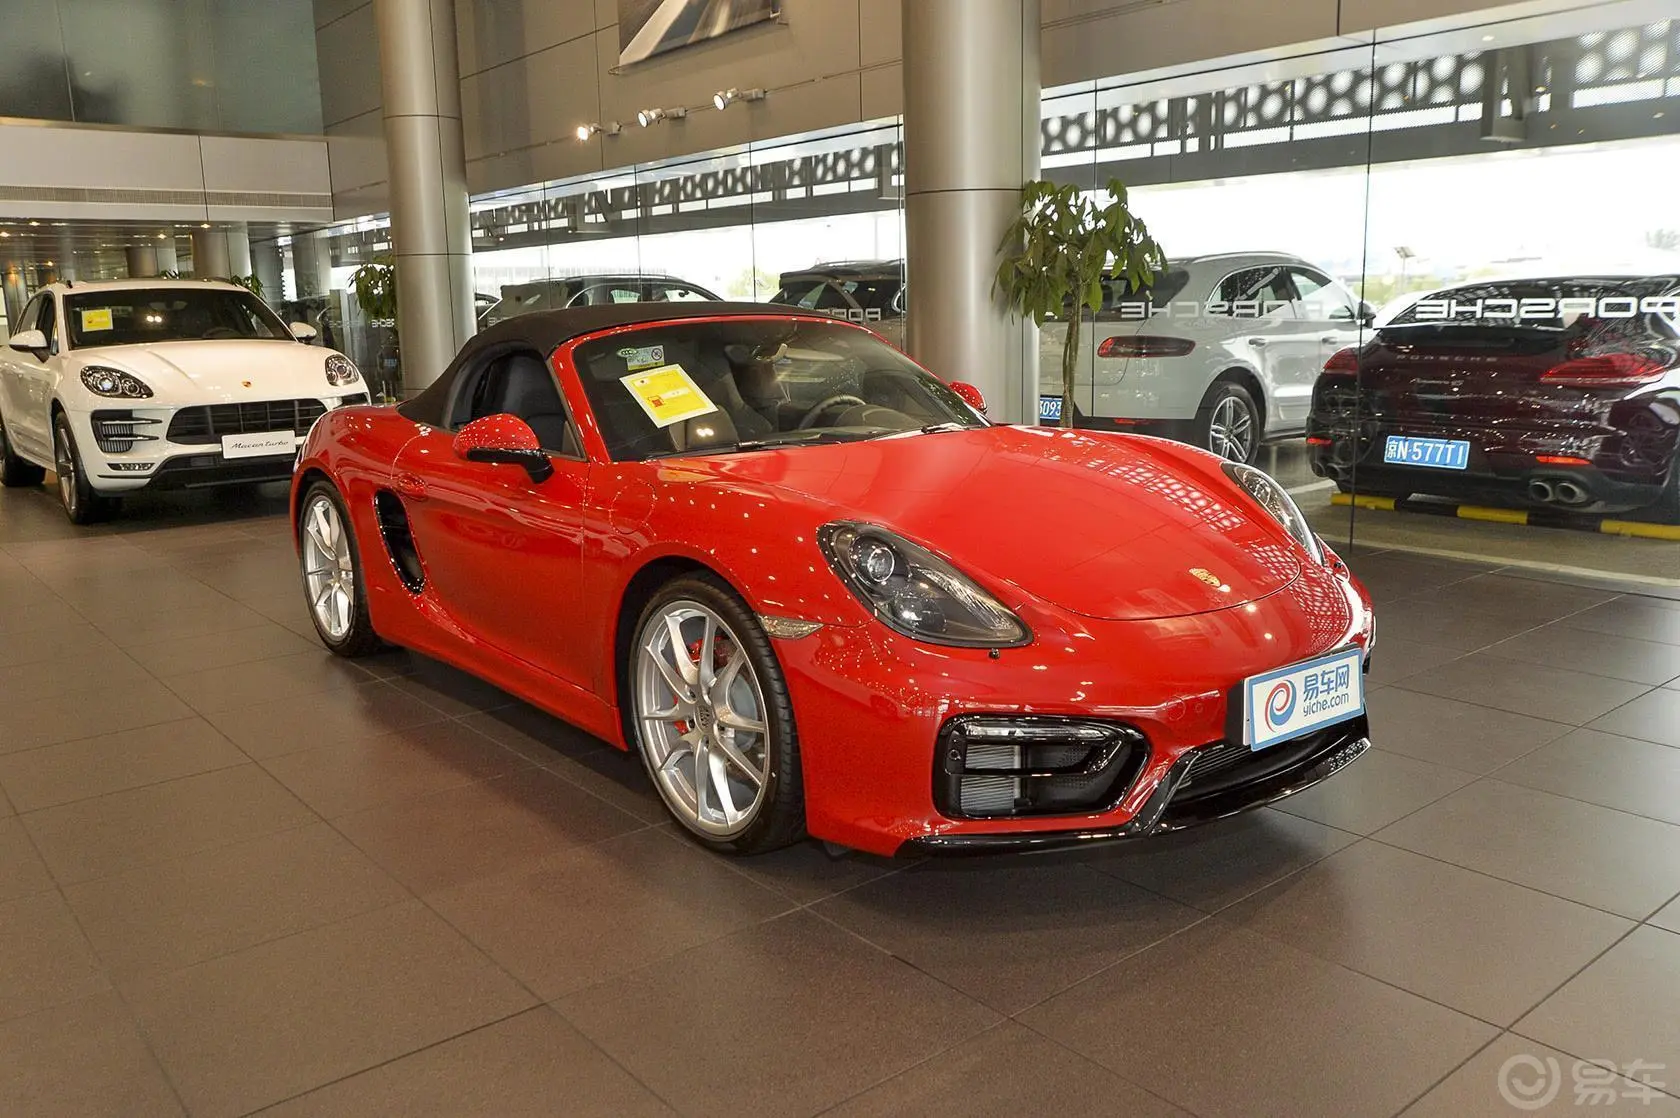 BoxsterBoxster GTS侧后45度车头向左水平